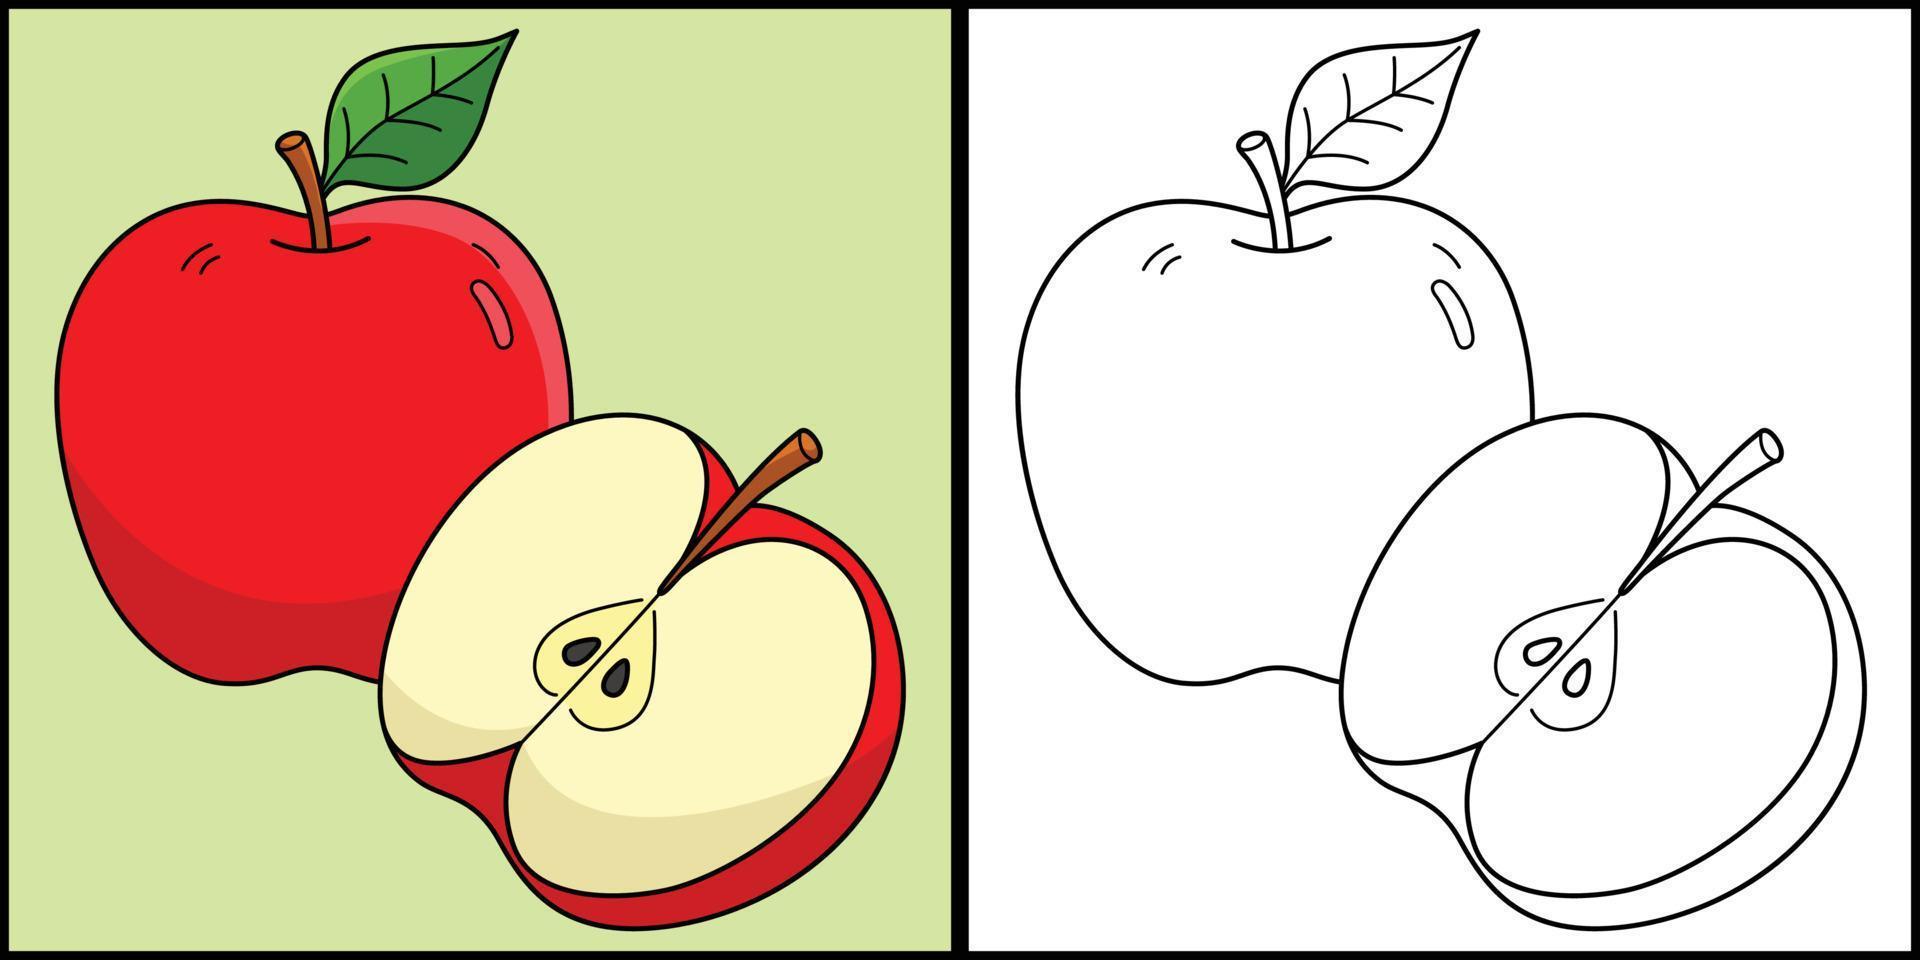 Apple Fruit Coloring Page Colored Illustration vector